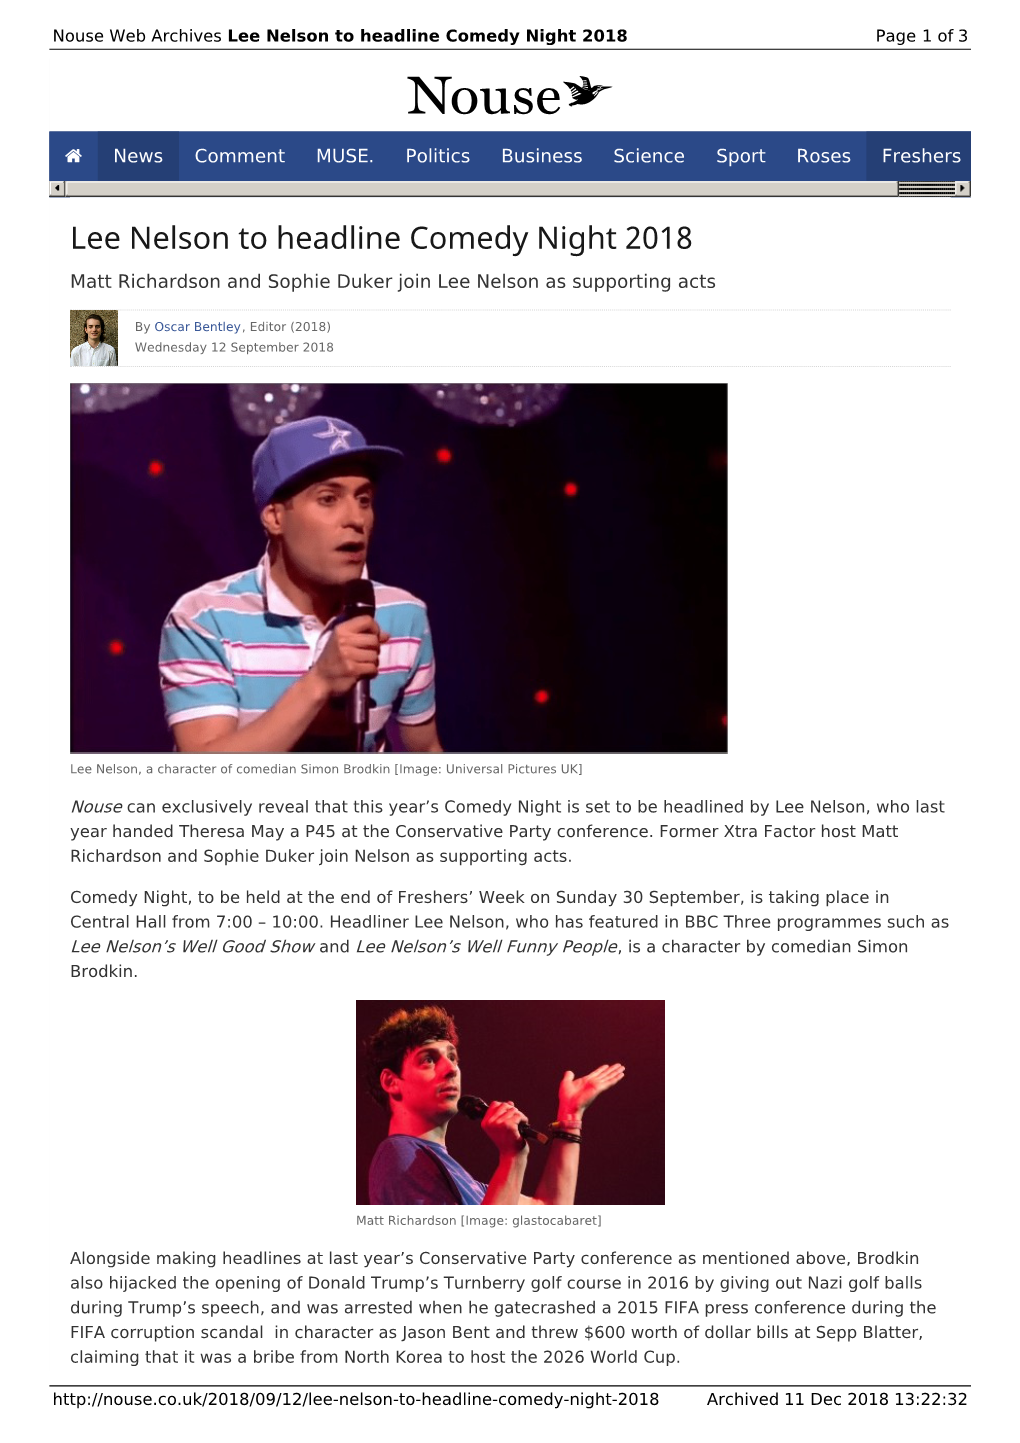 Lee Nelson to Headline Comedy Night 2018 | Nouse